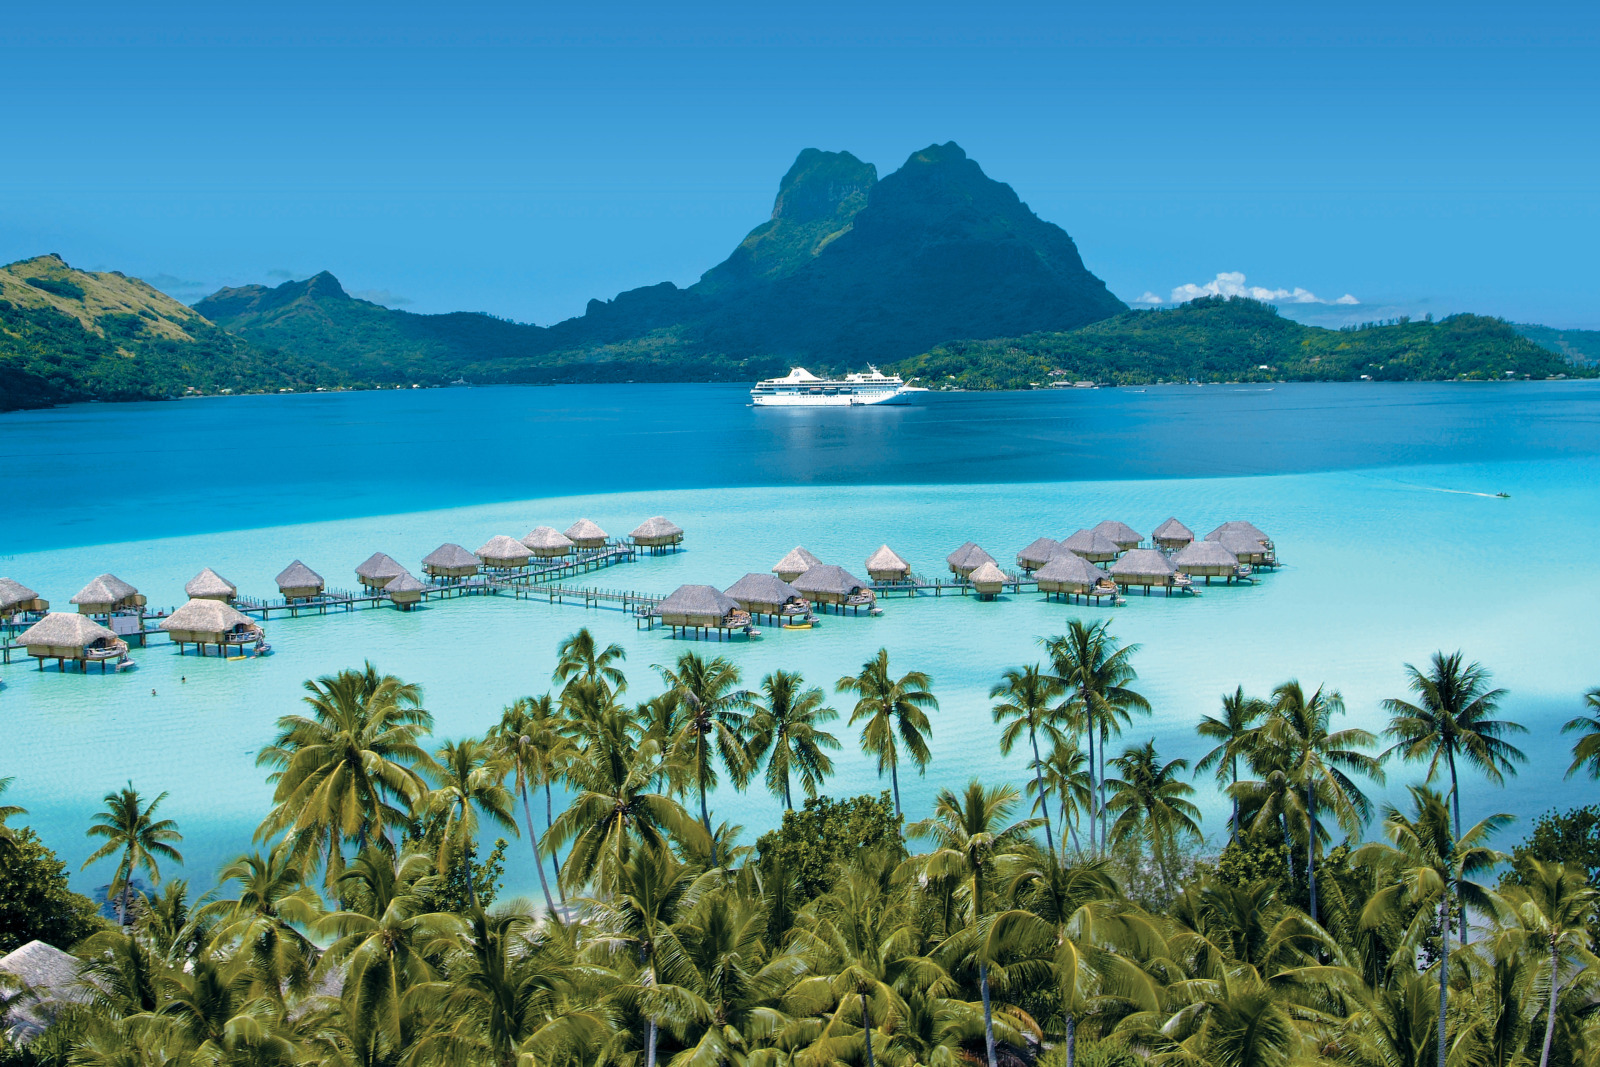 Travel in style onboard Le Paul Gauguin on a 13-night Fly-and-Cruise package to French Polynesia this June